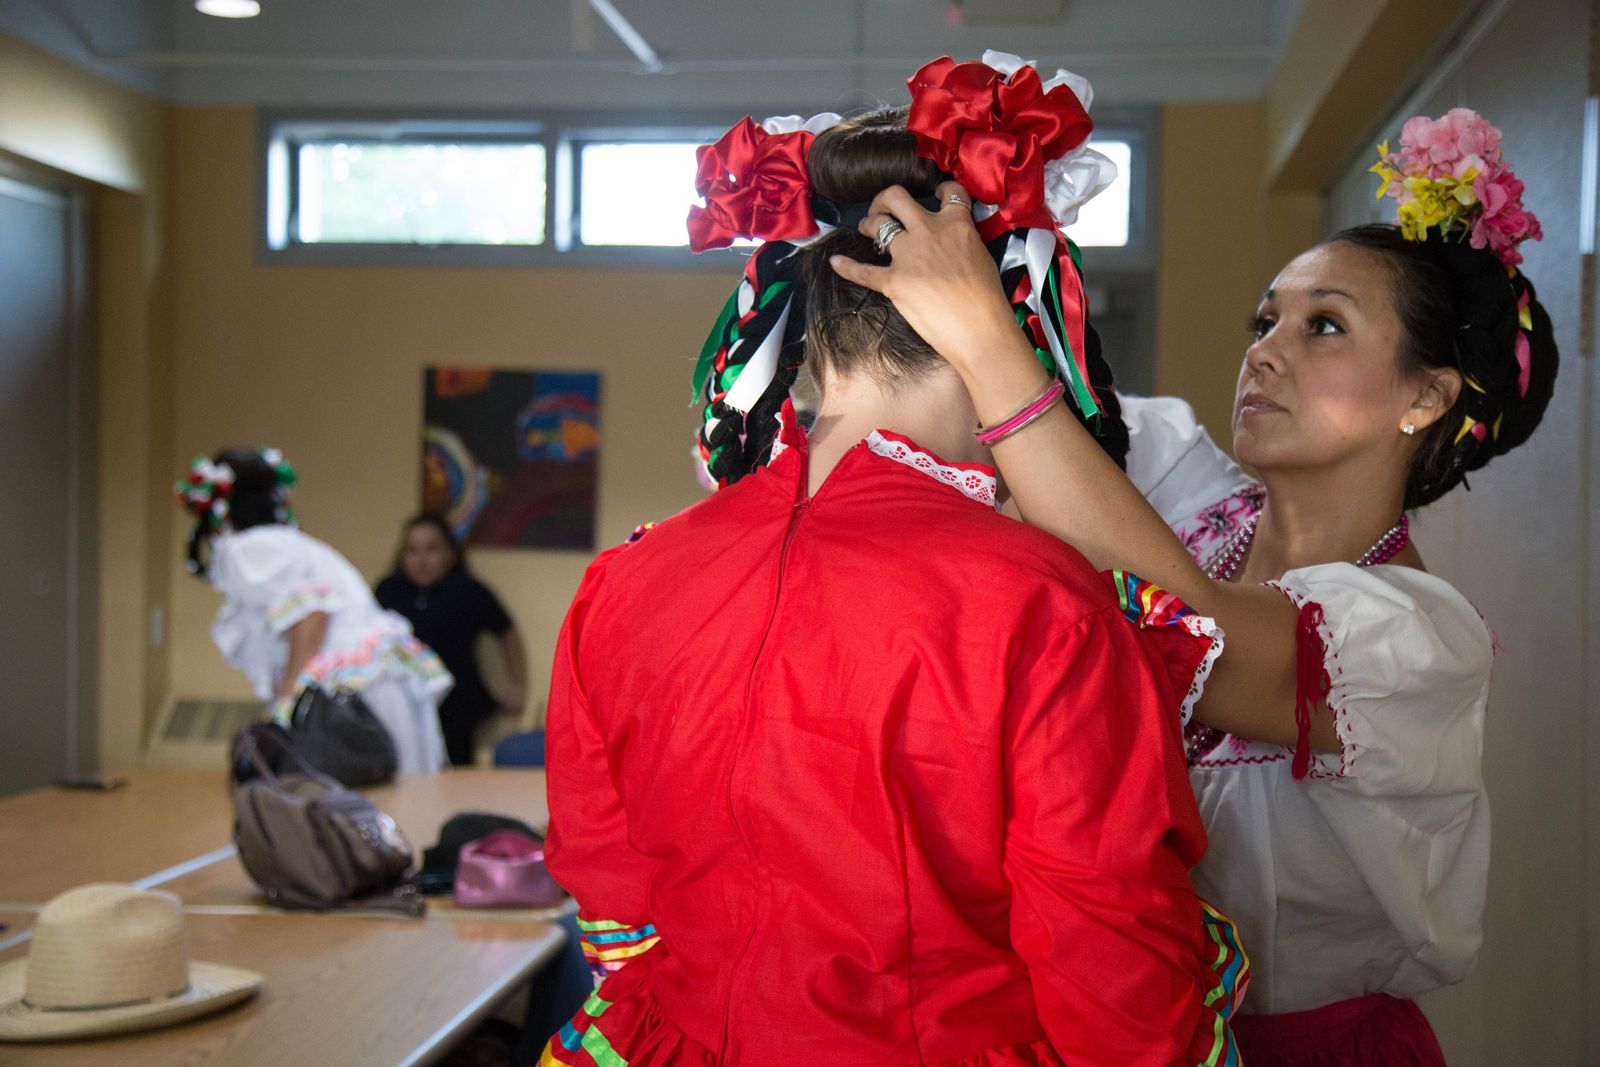 © Elisa Limon - Image from the Ballet Folklorico photography project